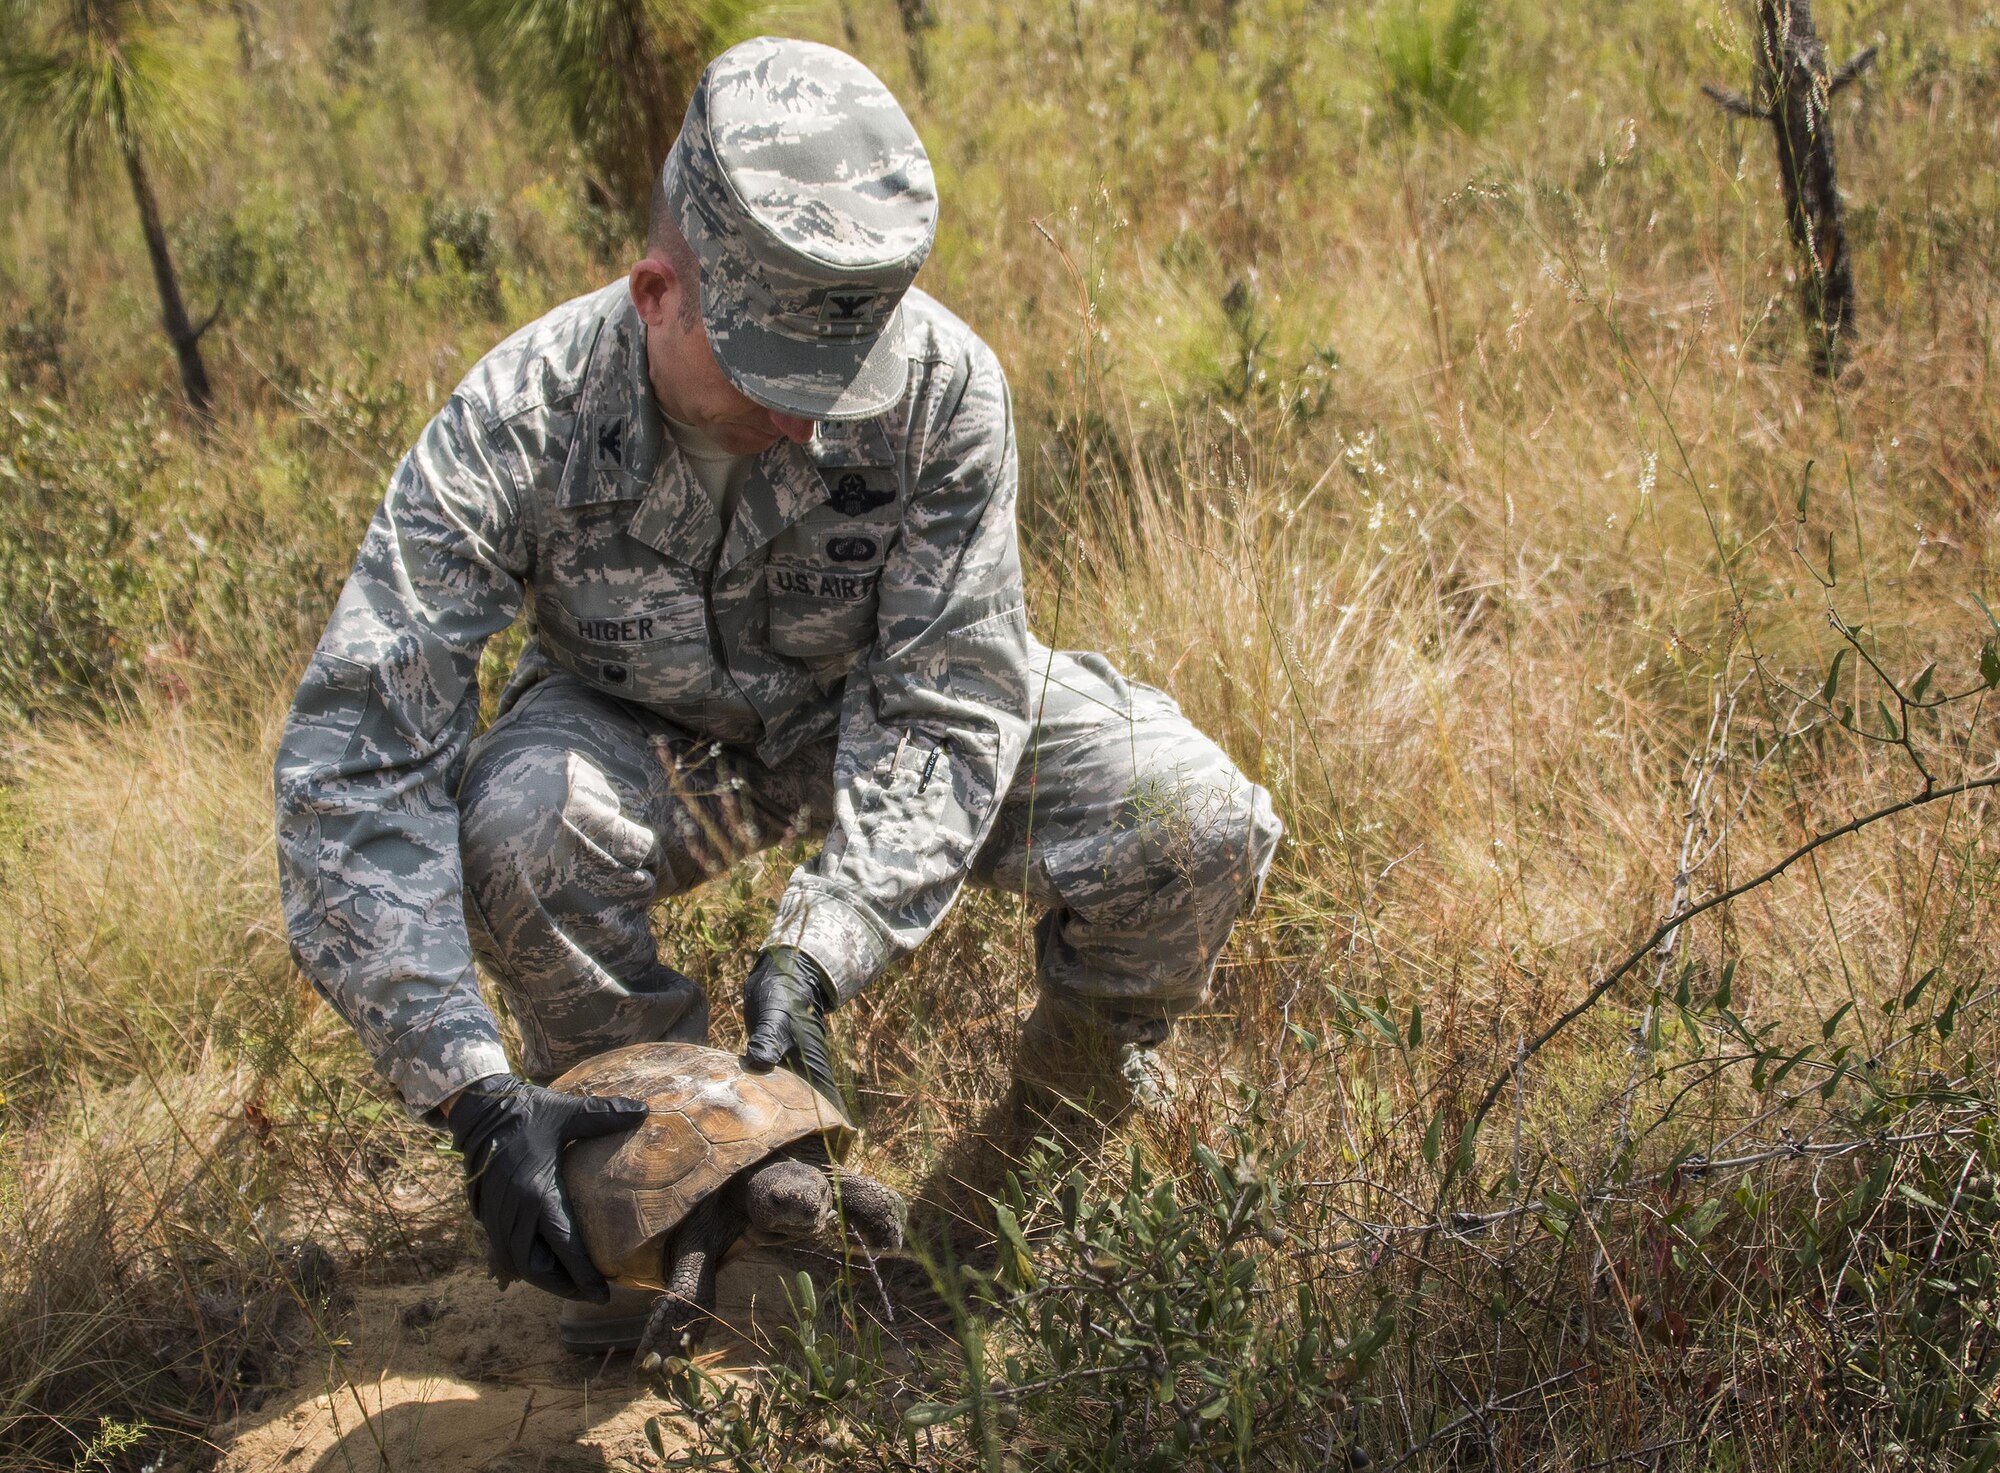 Col. Matthew Higer, 96th Test Wing vice commander, bends down to release a gopher tortoise into its new home deep within the Eglin Air Force Base range Oct. 26.  The first of approximately 250 tortoises were released into their 100-acre habitat after being rescued from urban development at their previous home in South Florida.  Increasing the gopher tortoise population here could prevent the U.S. Fish and Wildlife Service from listing the animal on the Threatened and Endangered Species list, allowing more flexibility for the military missions on Eglin. (U.S. Air Force photo/Samuel King Jr.)